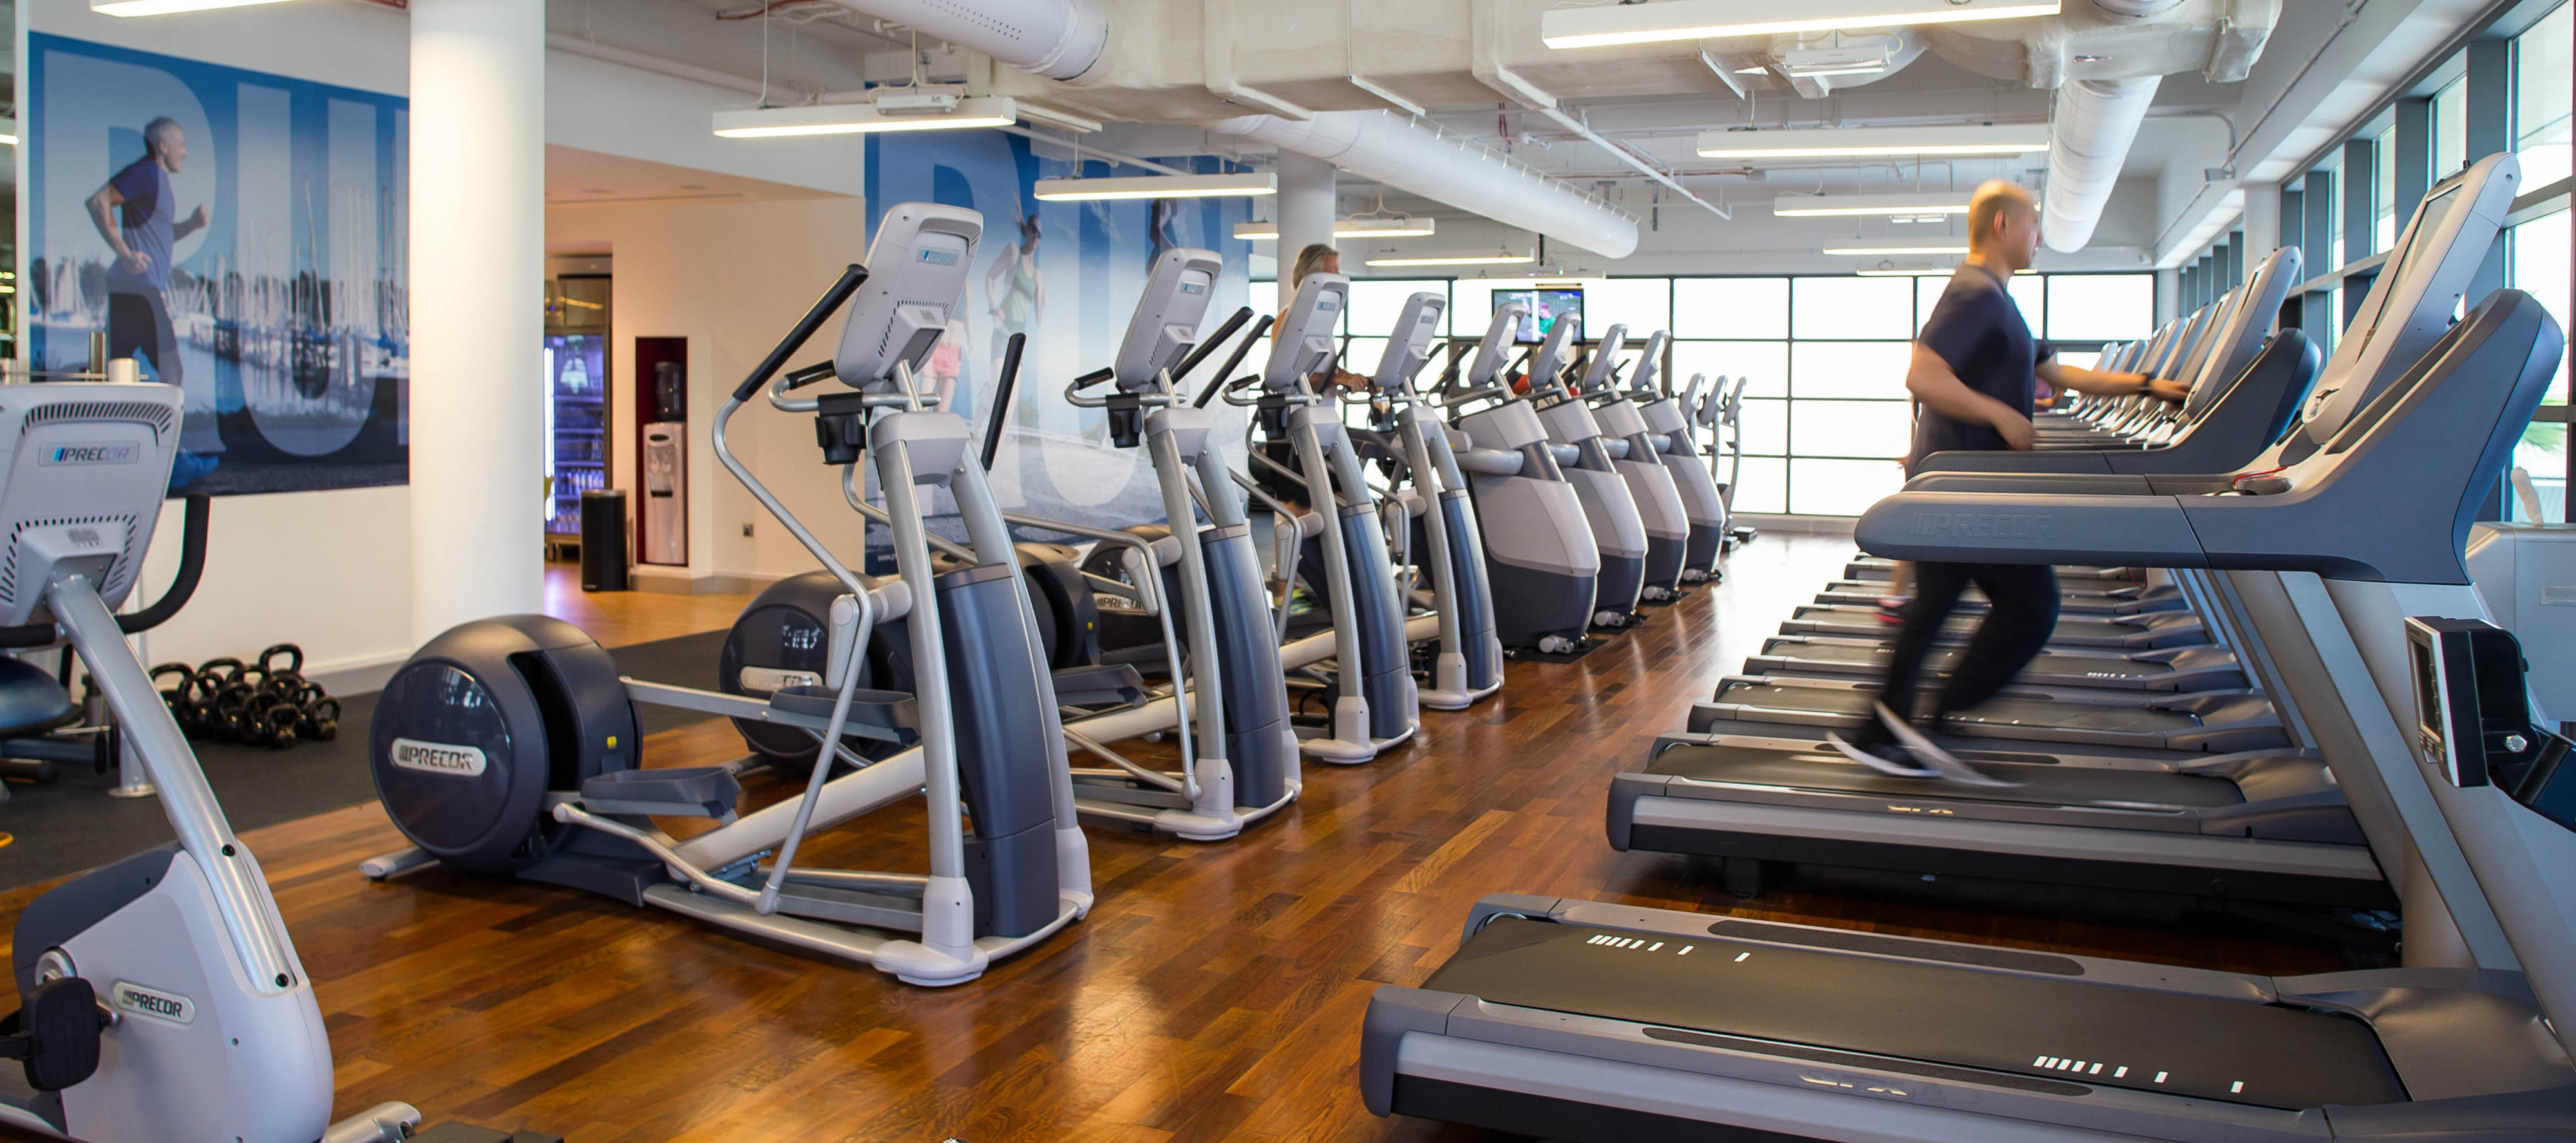 Renting Gym Equipment is your best option for your fitness center.